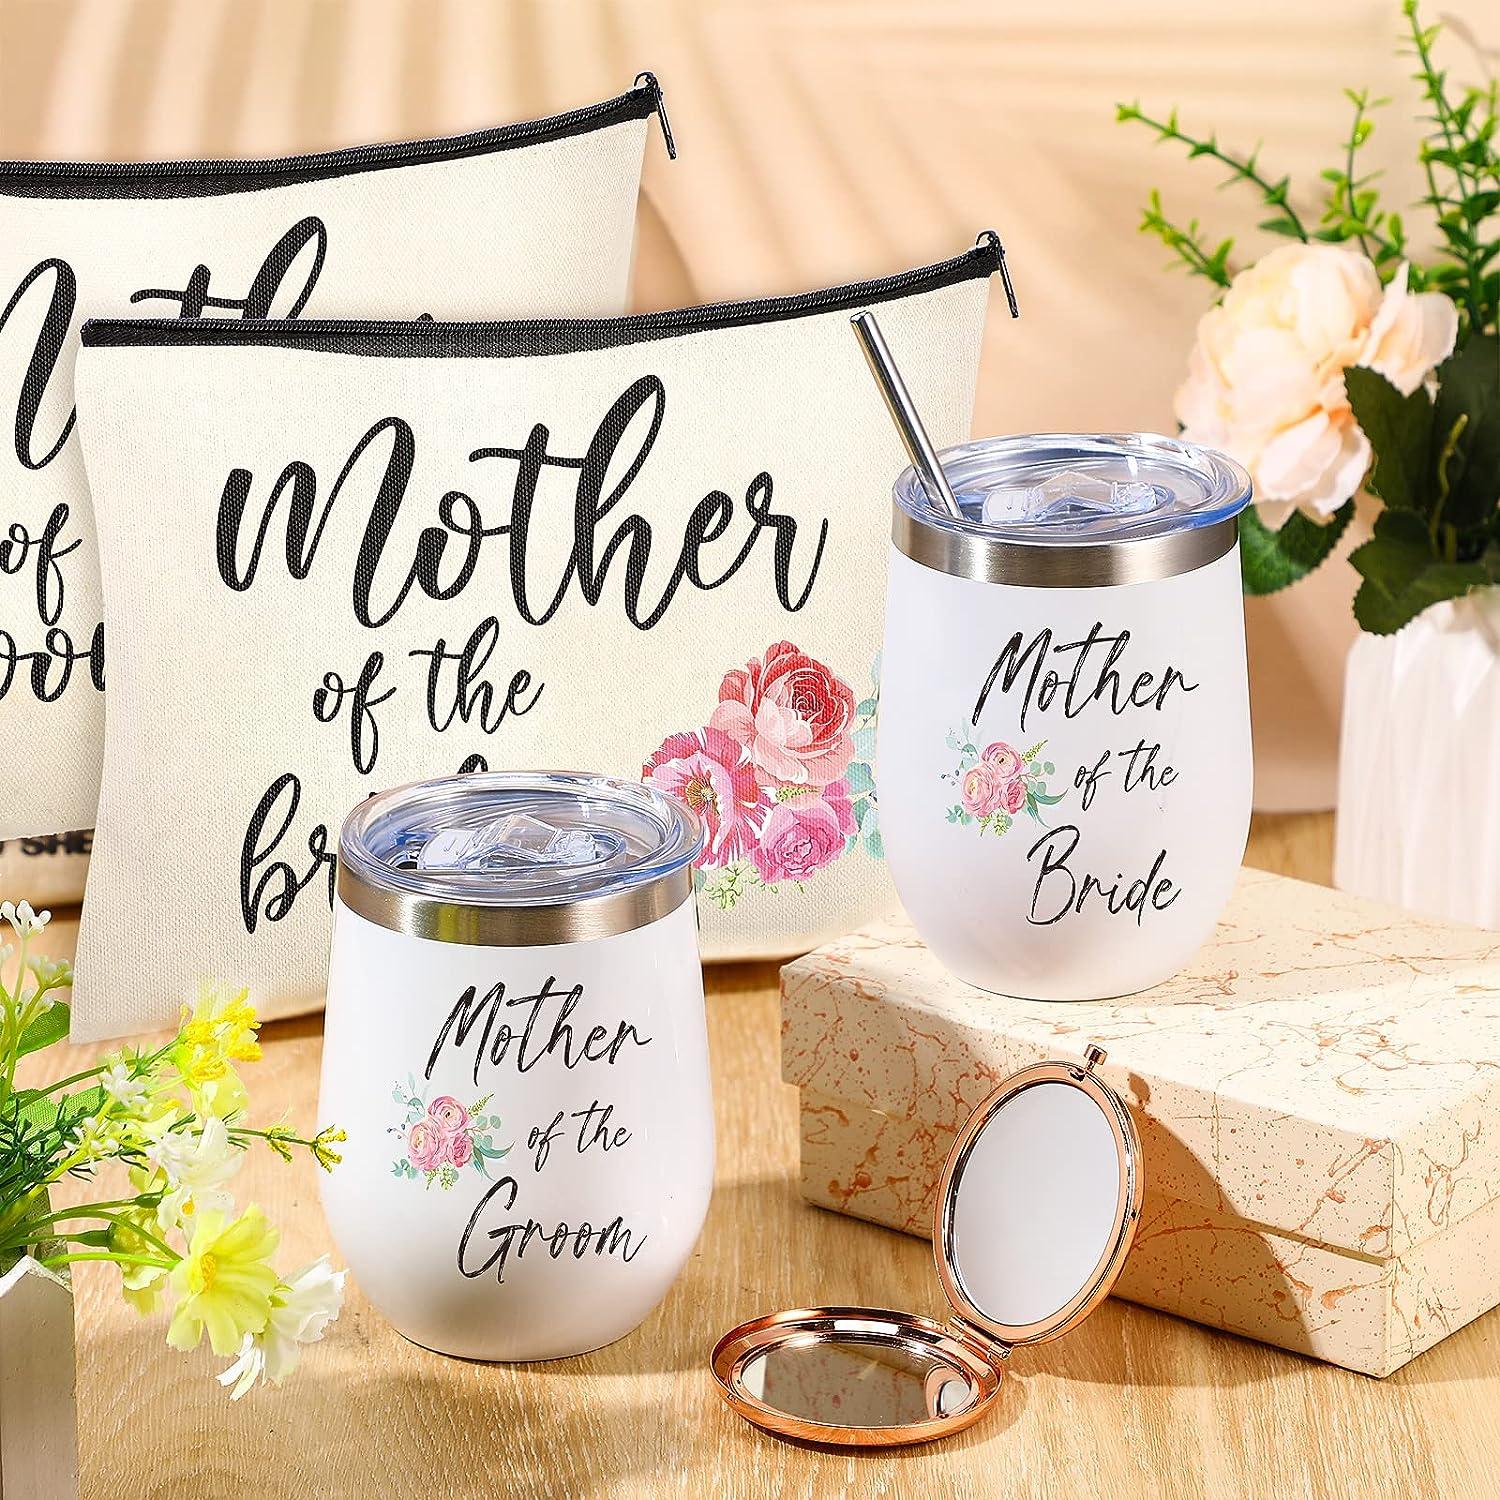 8 Pcs Mother of The Groom Gifts Mother of Bride Gifts Ceramic Coffee Mug  Makeup Bags Wedding Handkerchief Gift Box with Raffia Wedding Gifts from